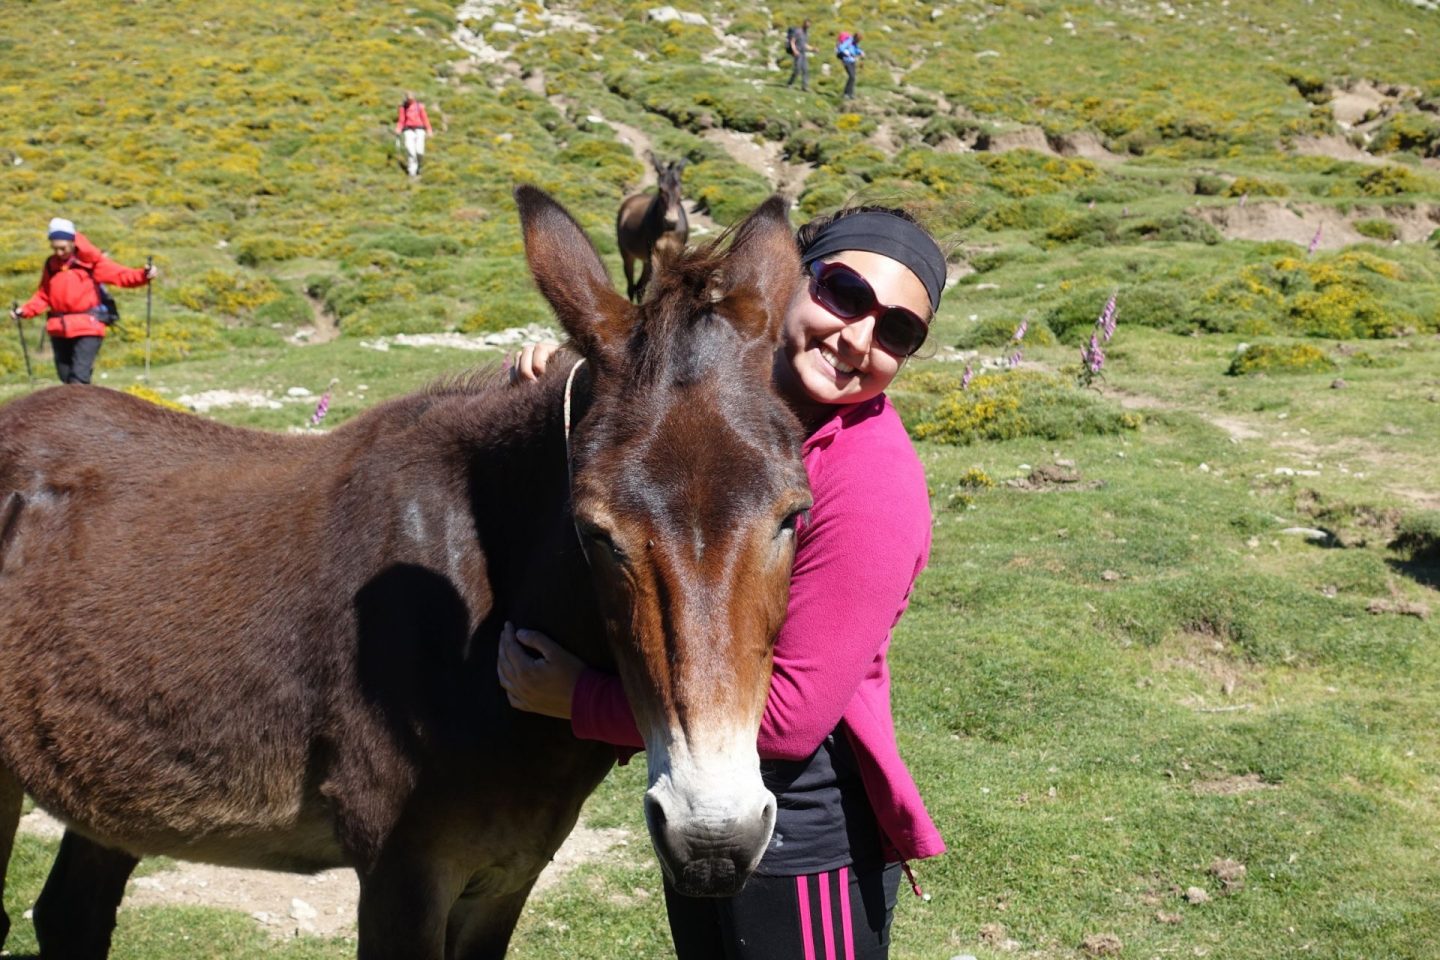 Nell cuddling a horse on the GR20, with green grass behind and other walkers in the background. She has her arms around the horse, is wearing a pink fleece and looks extremely happy.